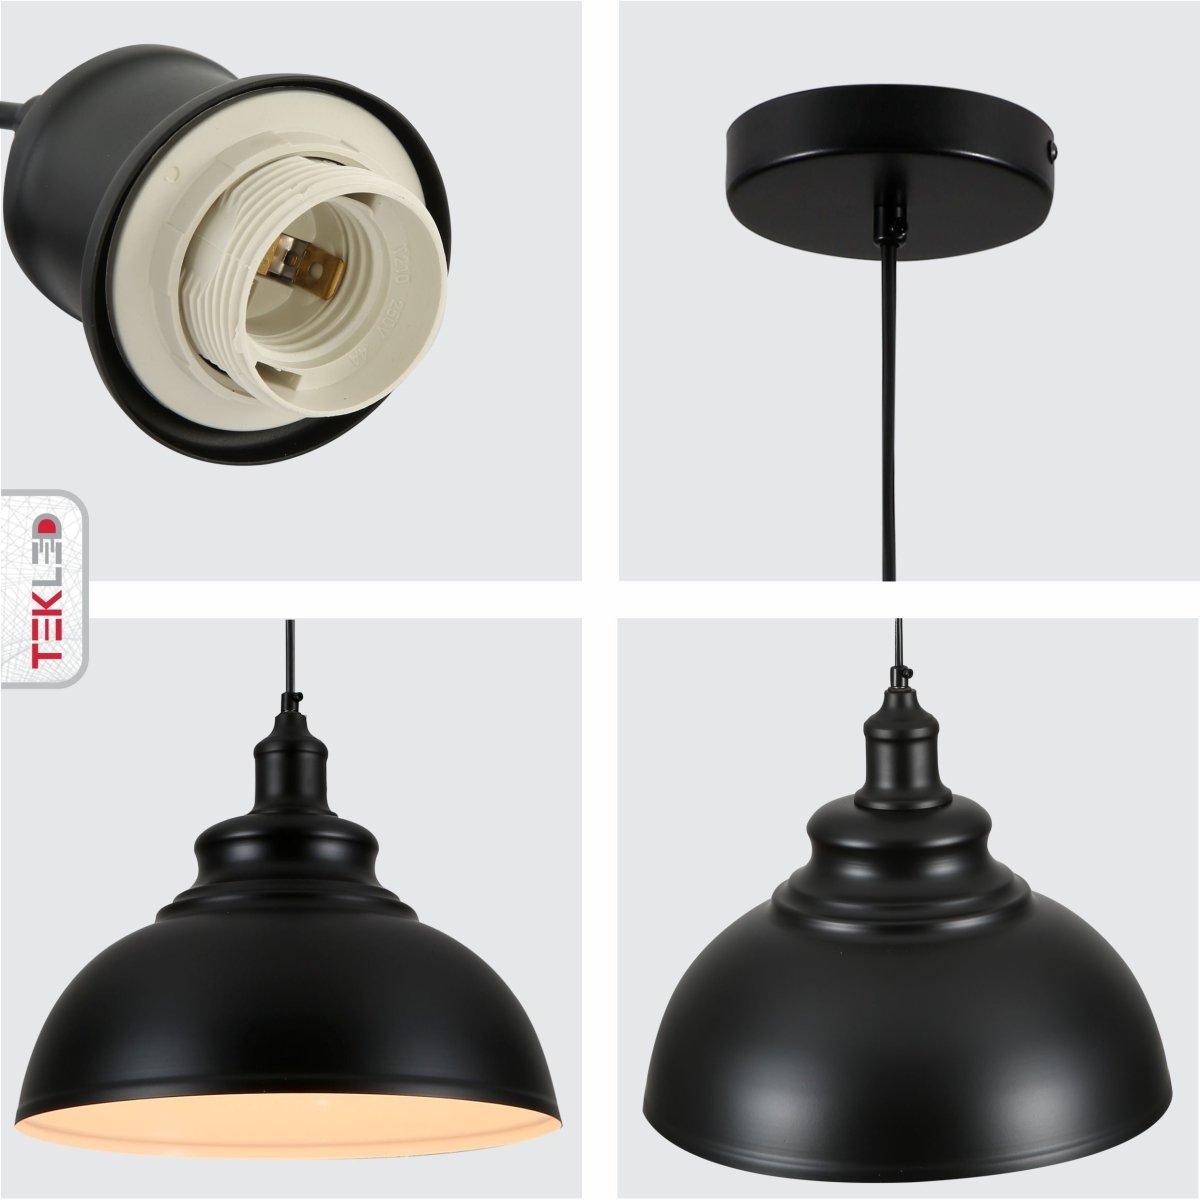 Detailed shots of Black Dome Industrial Large Metal Ceiling Pendant Light with E27 Fitting | TEKLED 150-18364